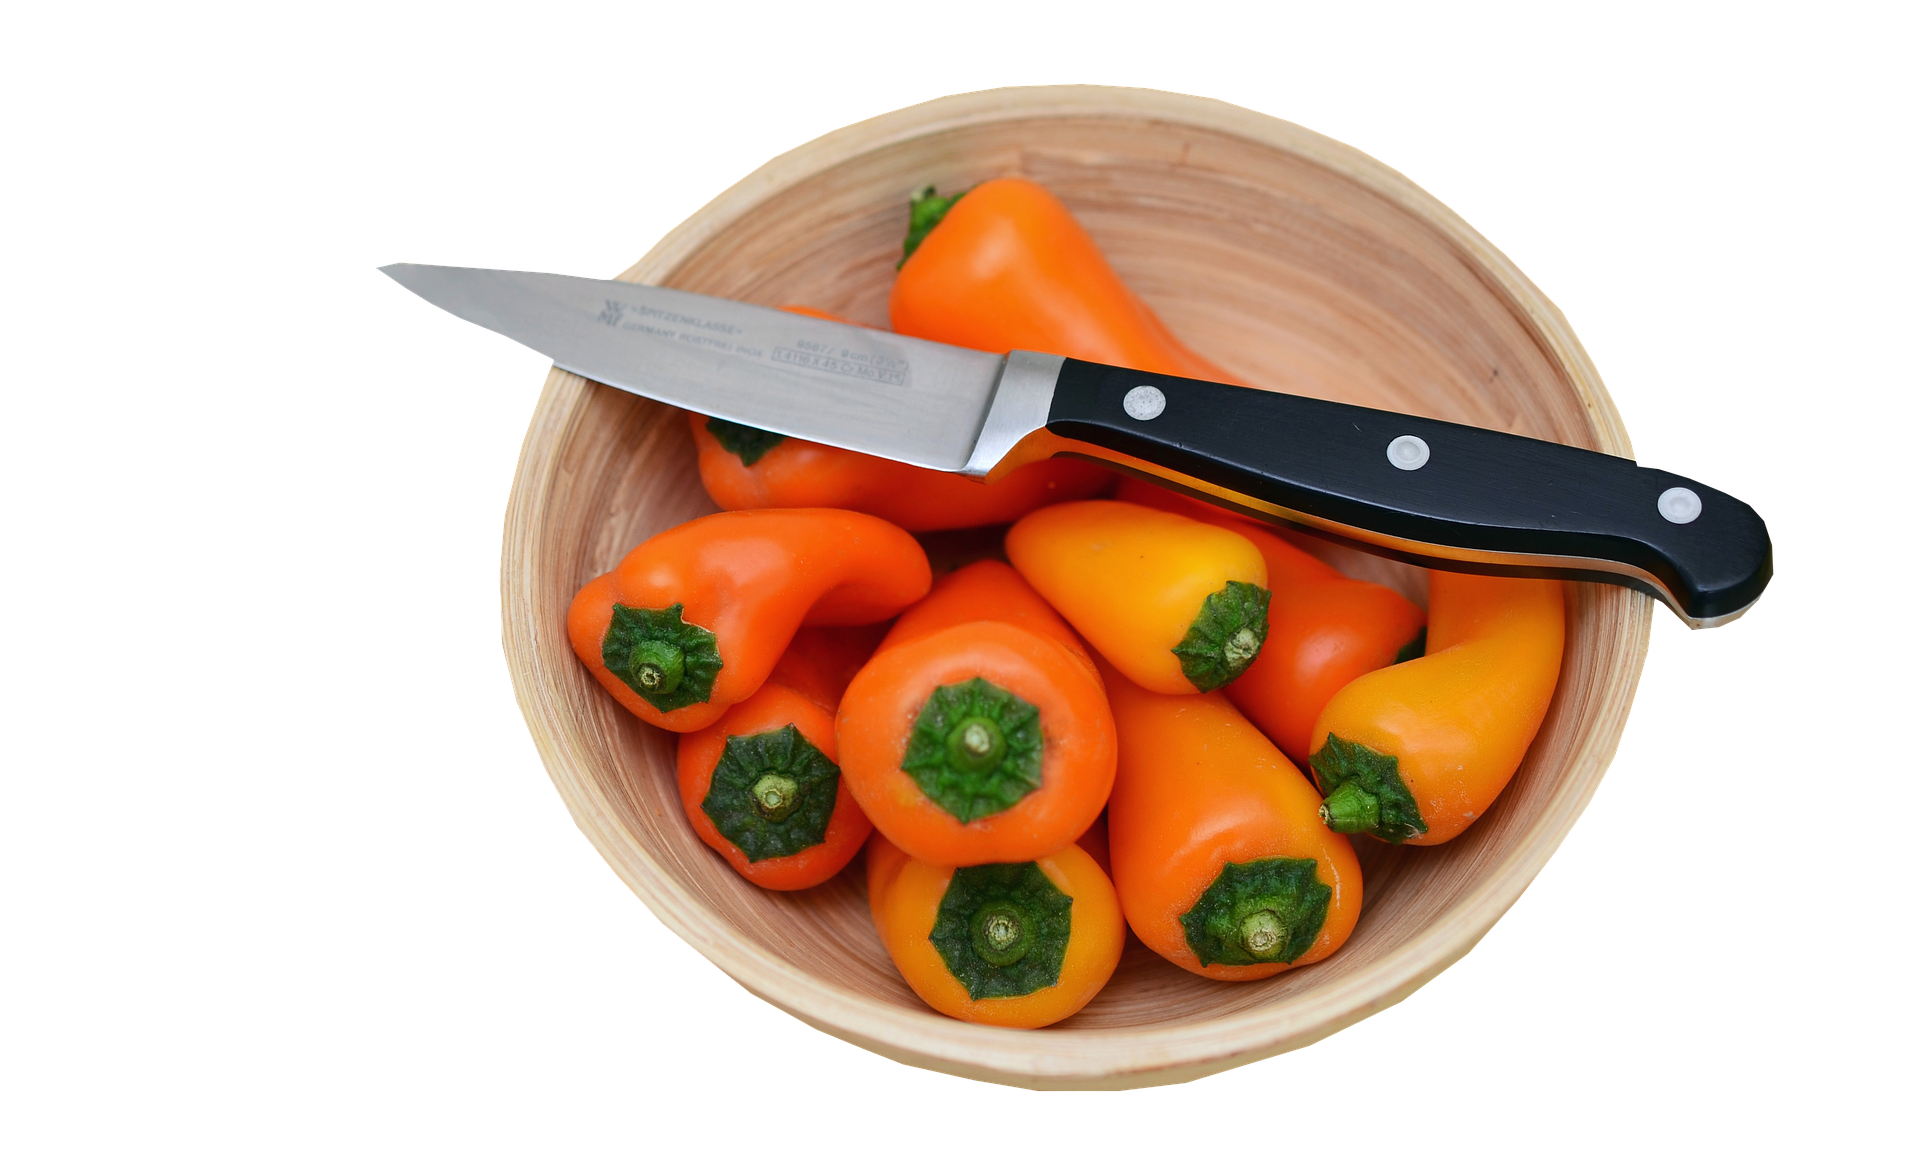 A Bowl Of Orange Peppers And A Knife